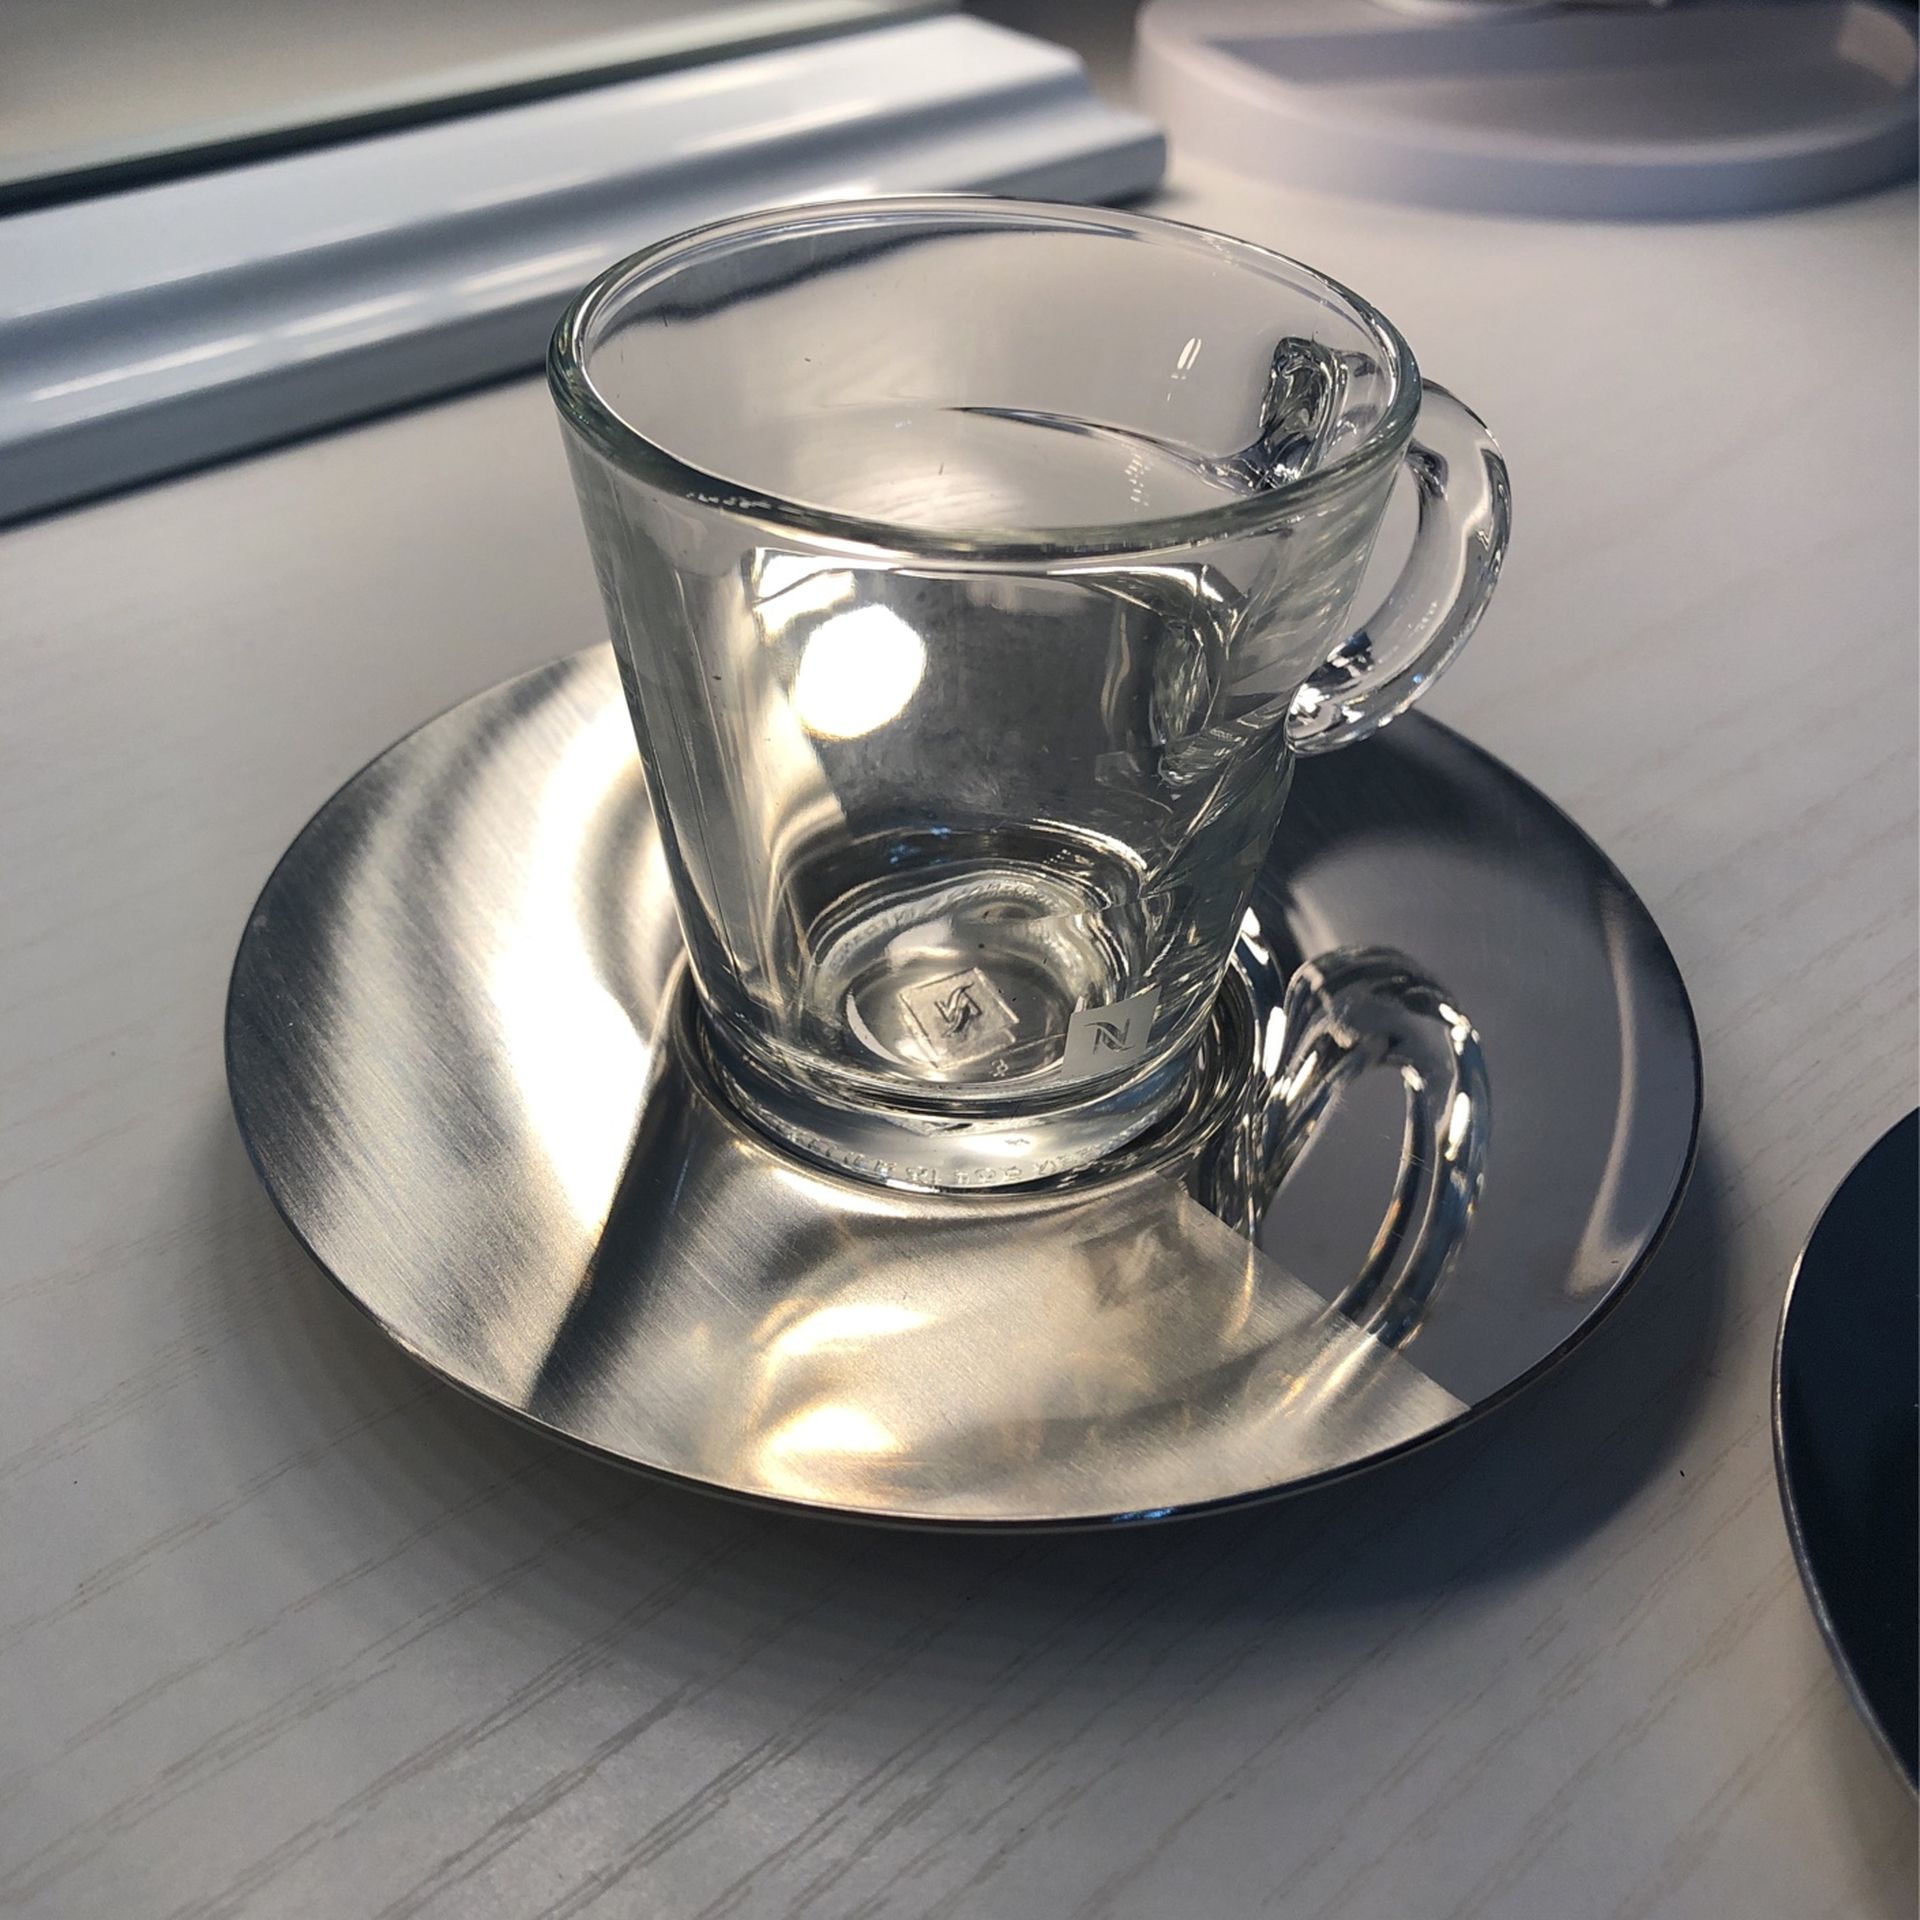 VIEW Espresso Cups, VIEW Collection